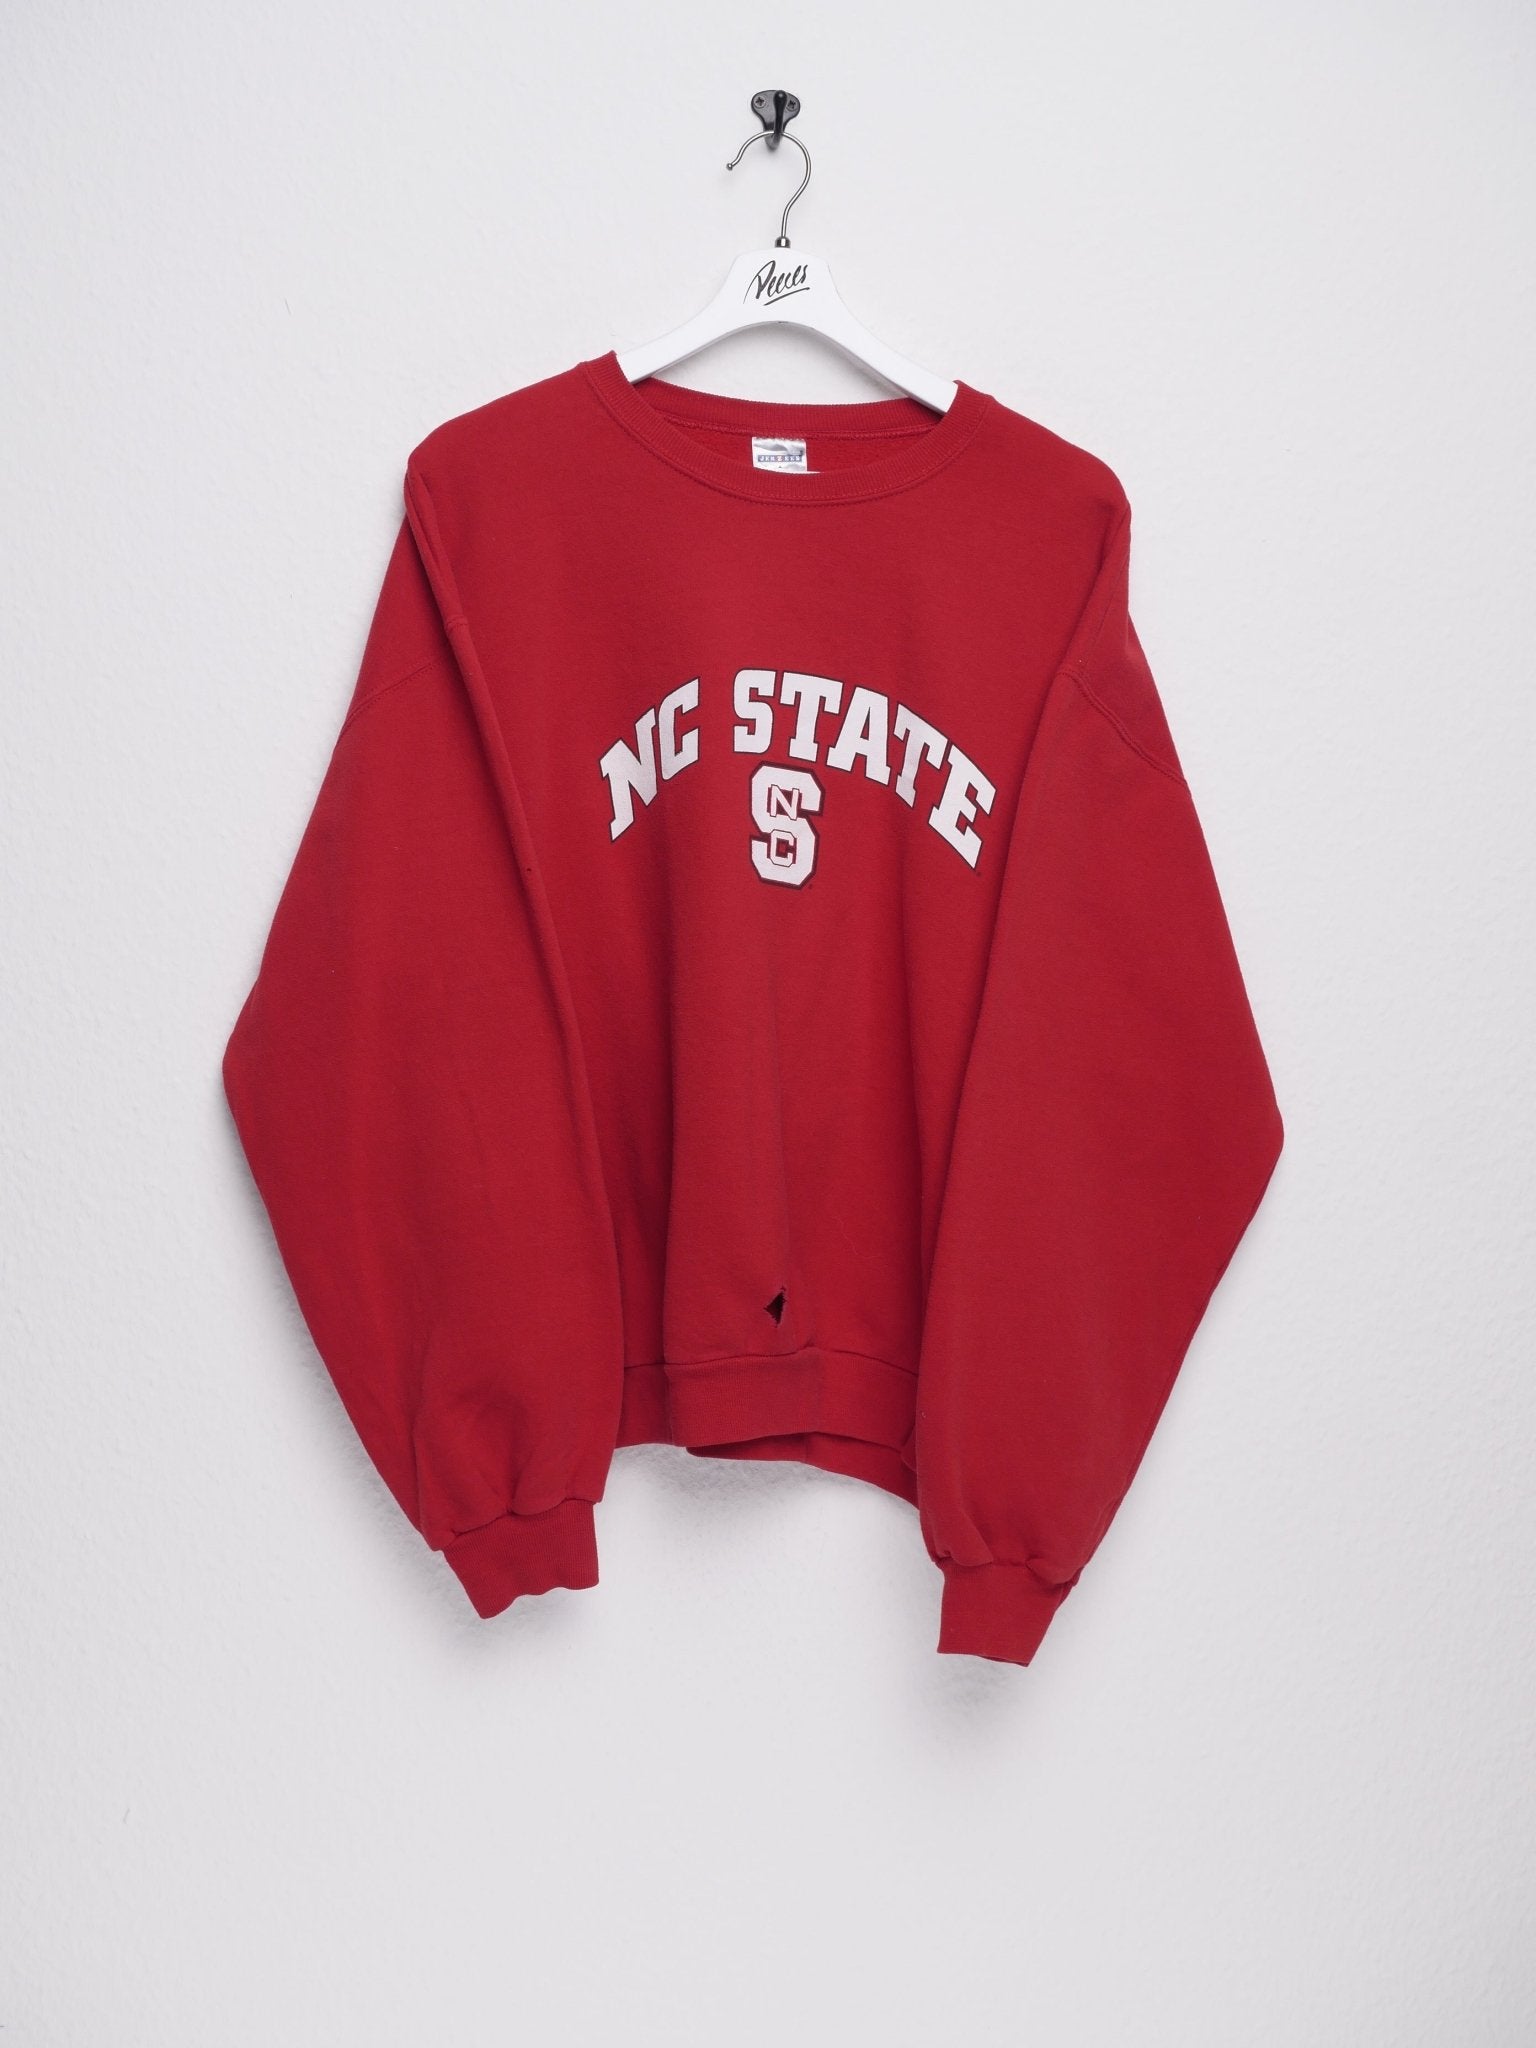 NC State University printed Logo red Sweater - Peeces